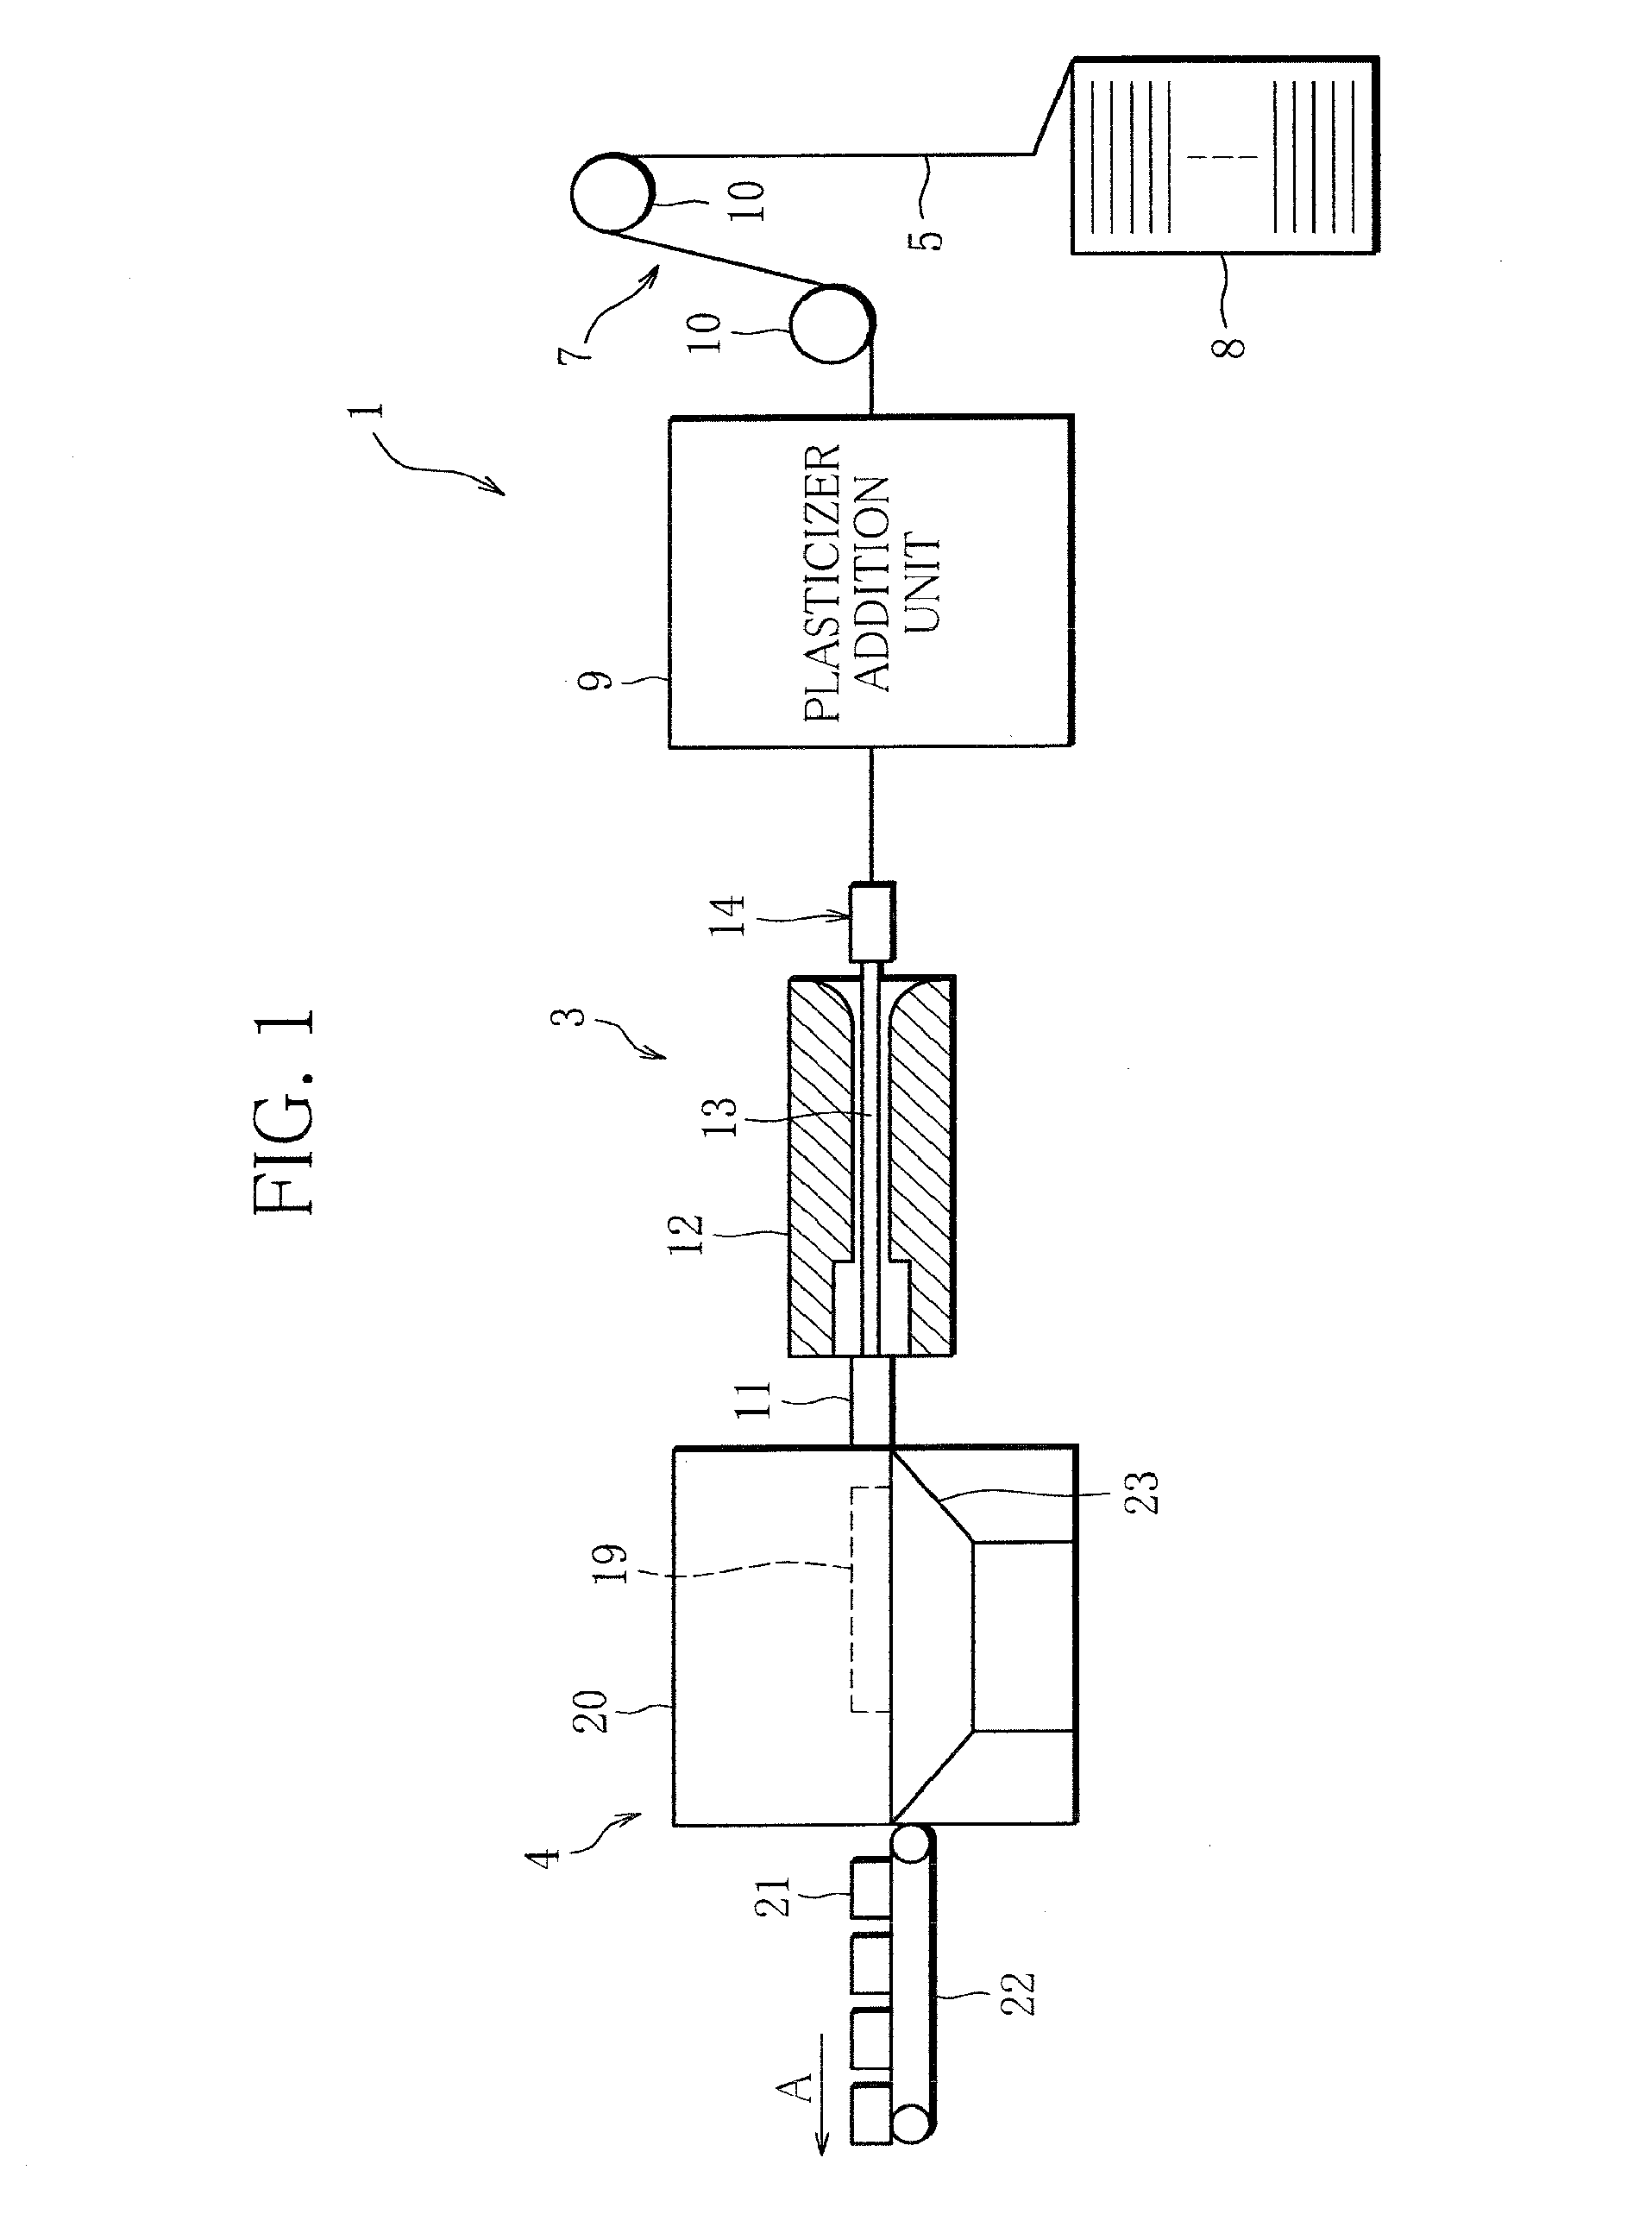 Filter manufacturing machine, filter manufacturing method using the machine, and hollow filter